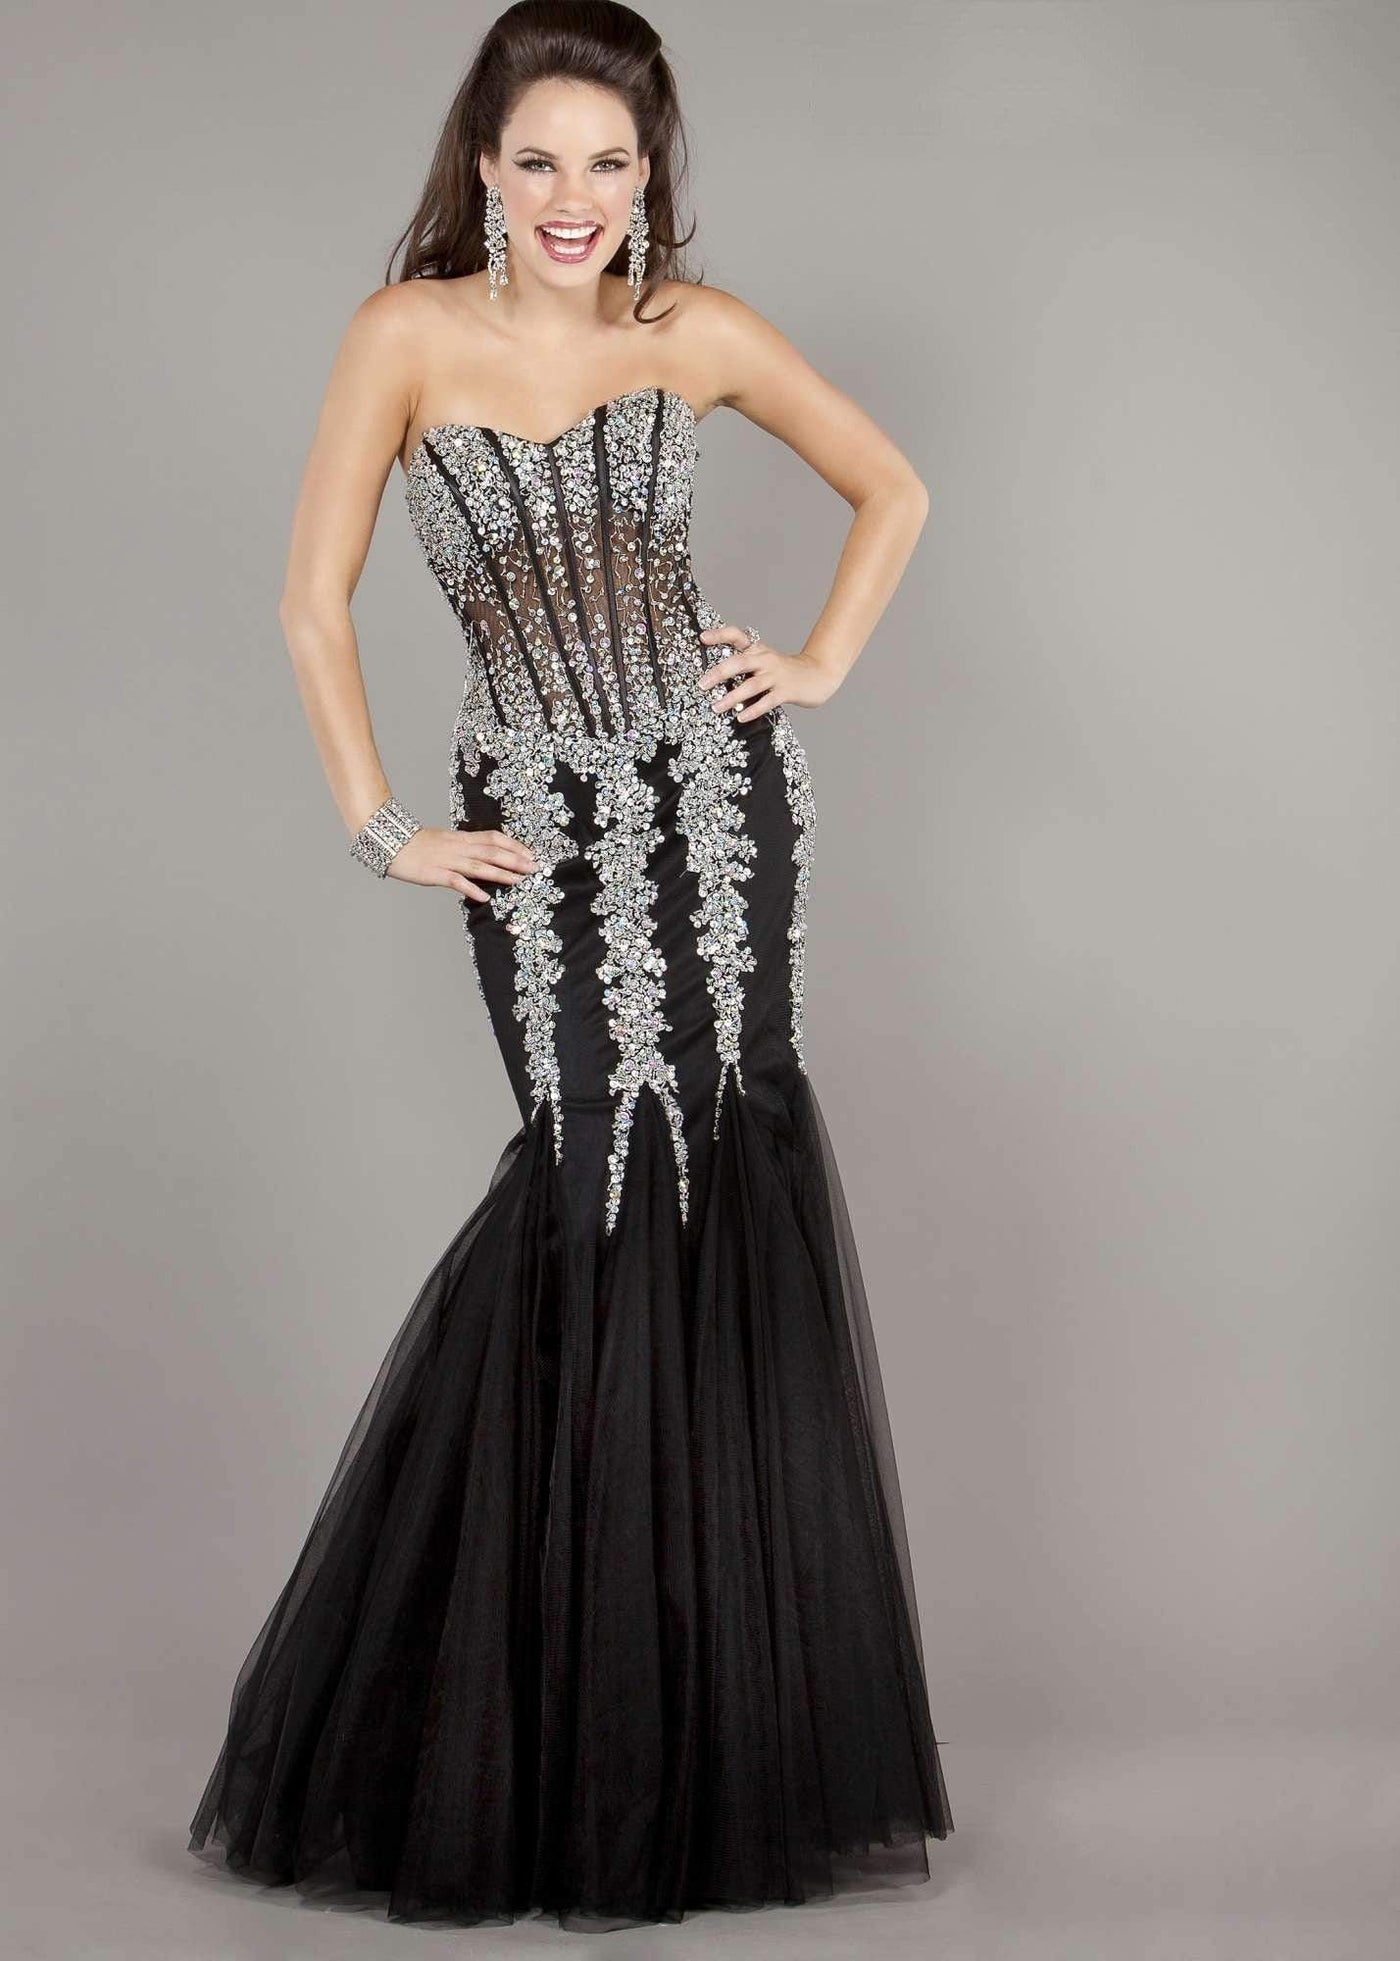 Jovani 5908 Strapless Sweetheart Corset Illusion Bodice Mermaid Gown Pageant Dresses 00 / Black/Silver